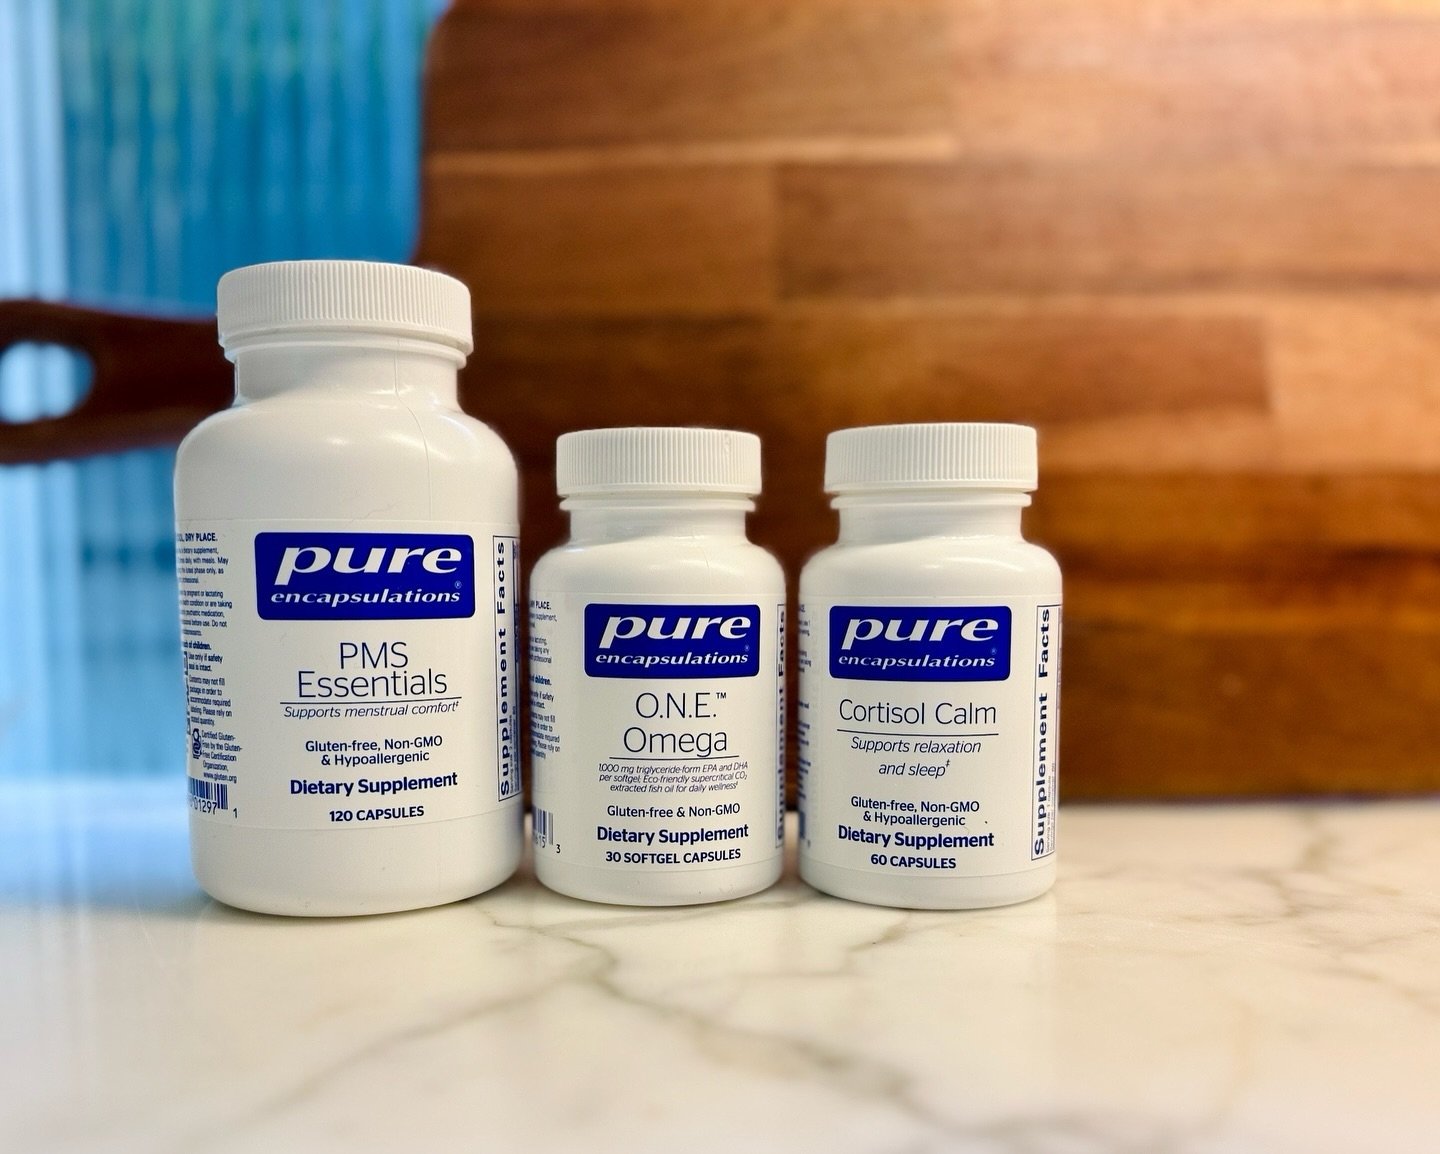 💛We chose to carry Pure Encapsulations because each product is formulated using high‑quality, pure ingredients backed by verifiable science and FREE FROM unnecessary additives and many common allergens. 

Stop in we would love to share more.  #busha